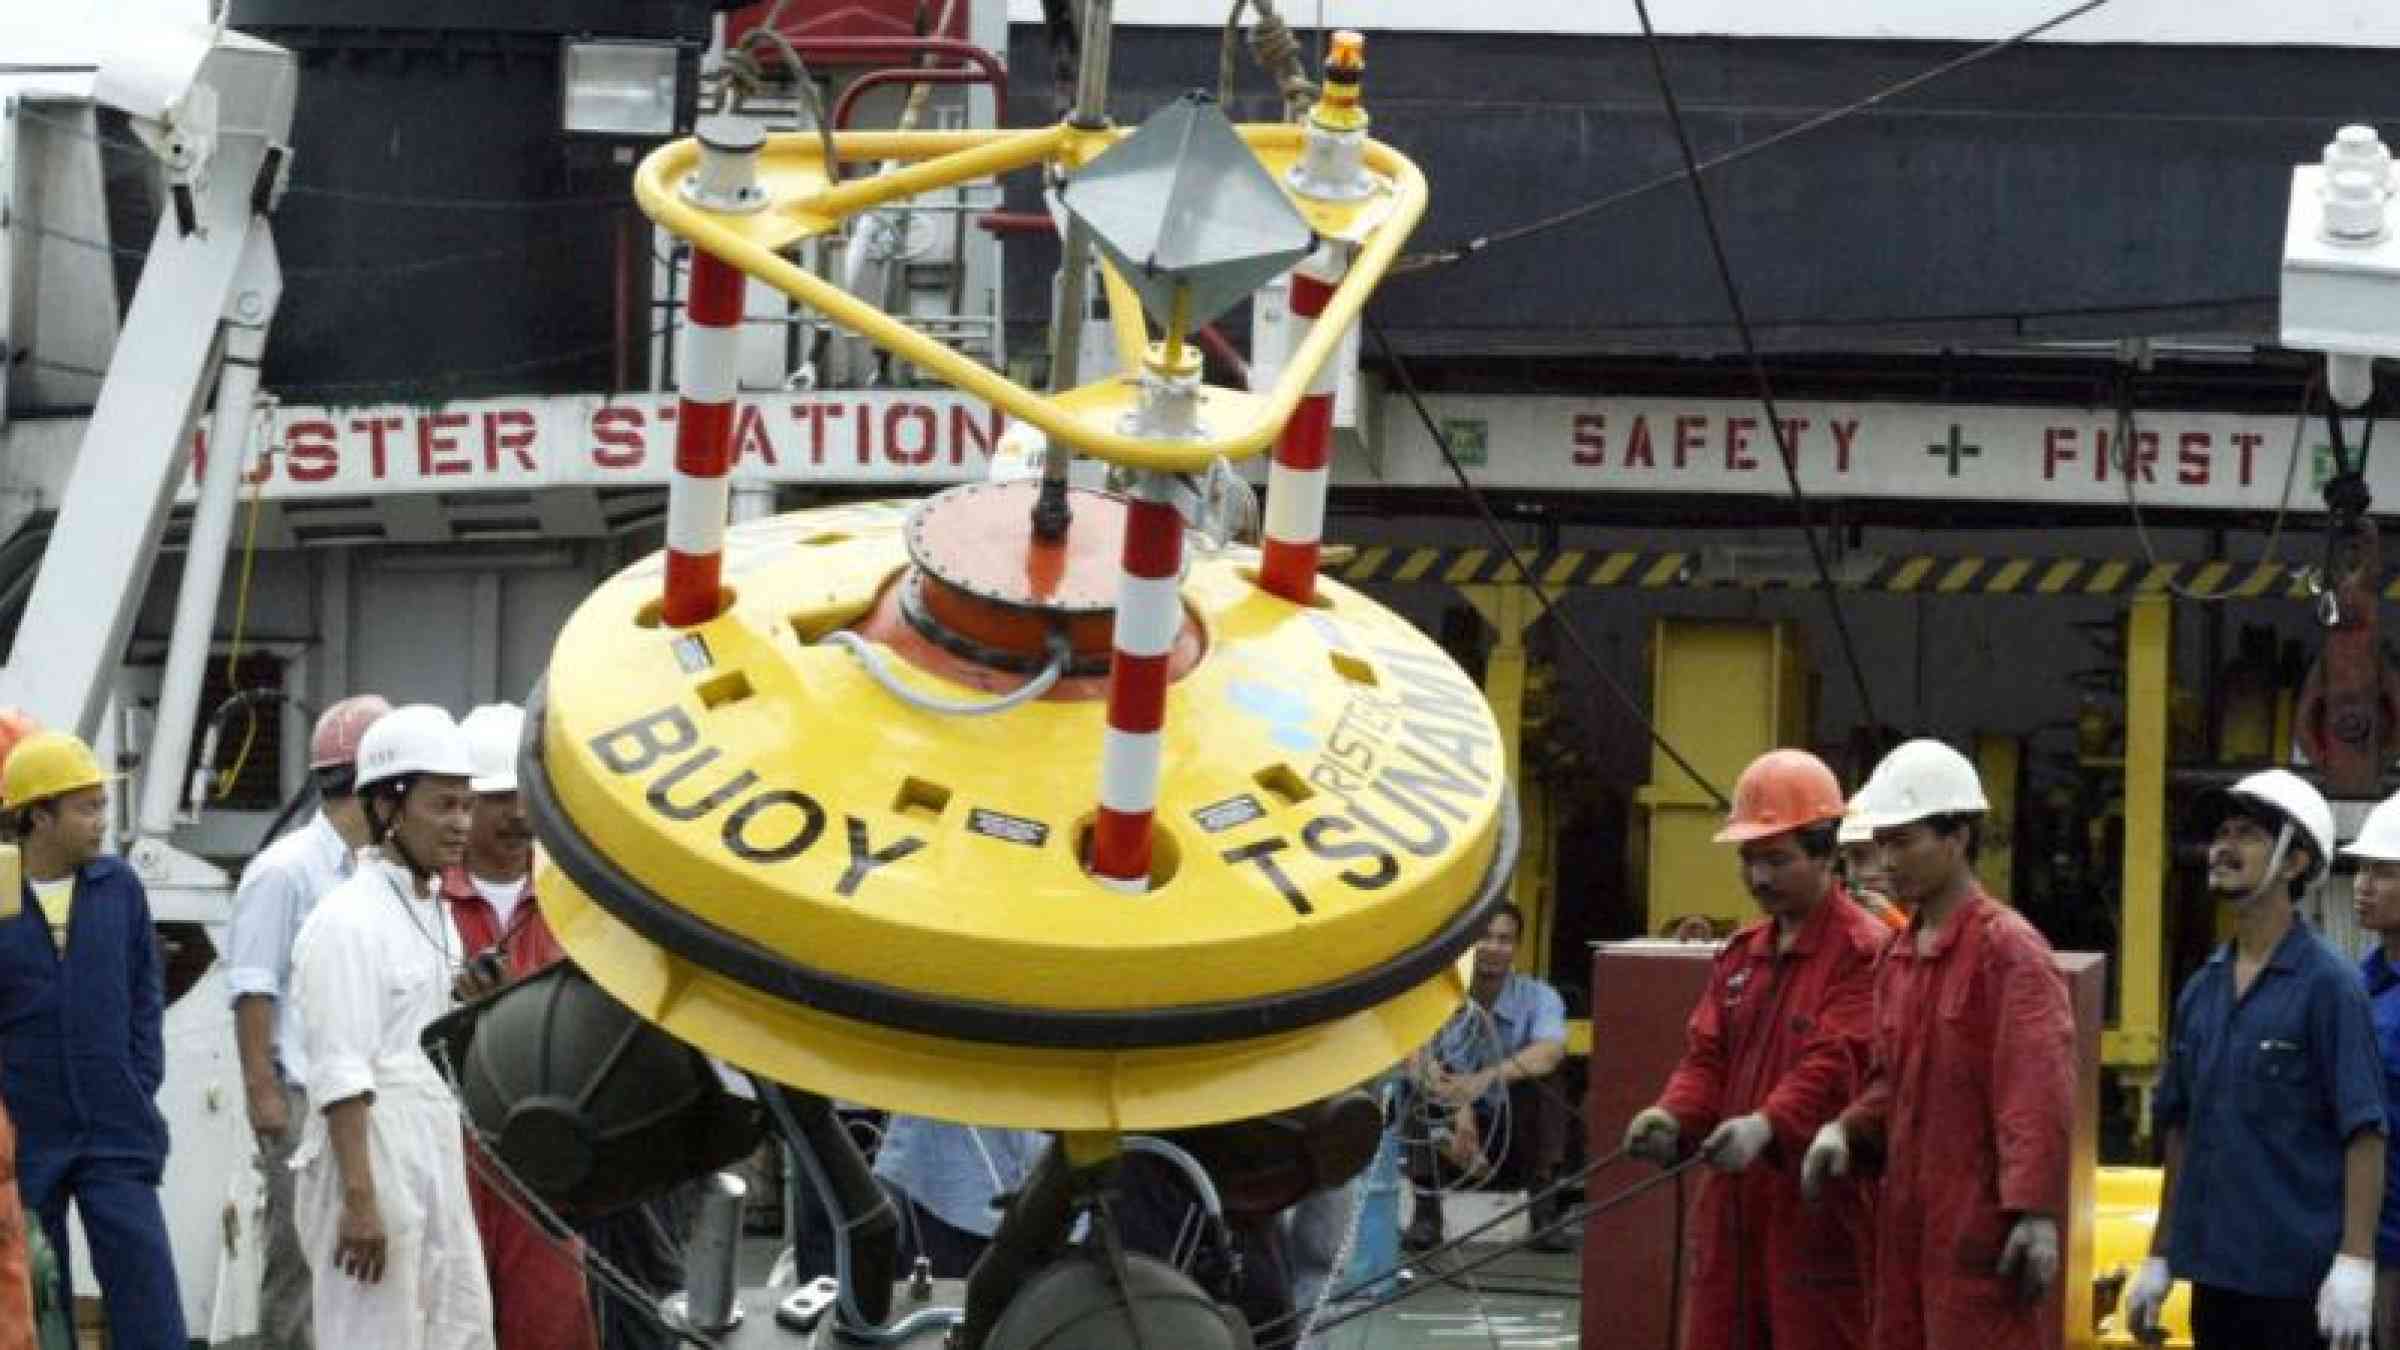 This tsunami buoy undergoing inspection in Indonesia is part of the Indian Ocean tsunami warning system introduced after the 2004 tsunami